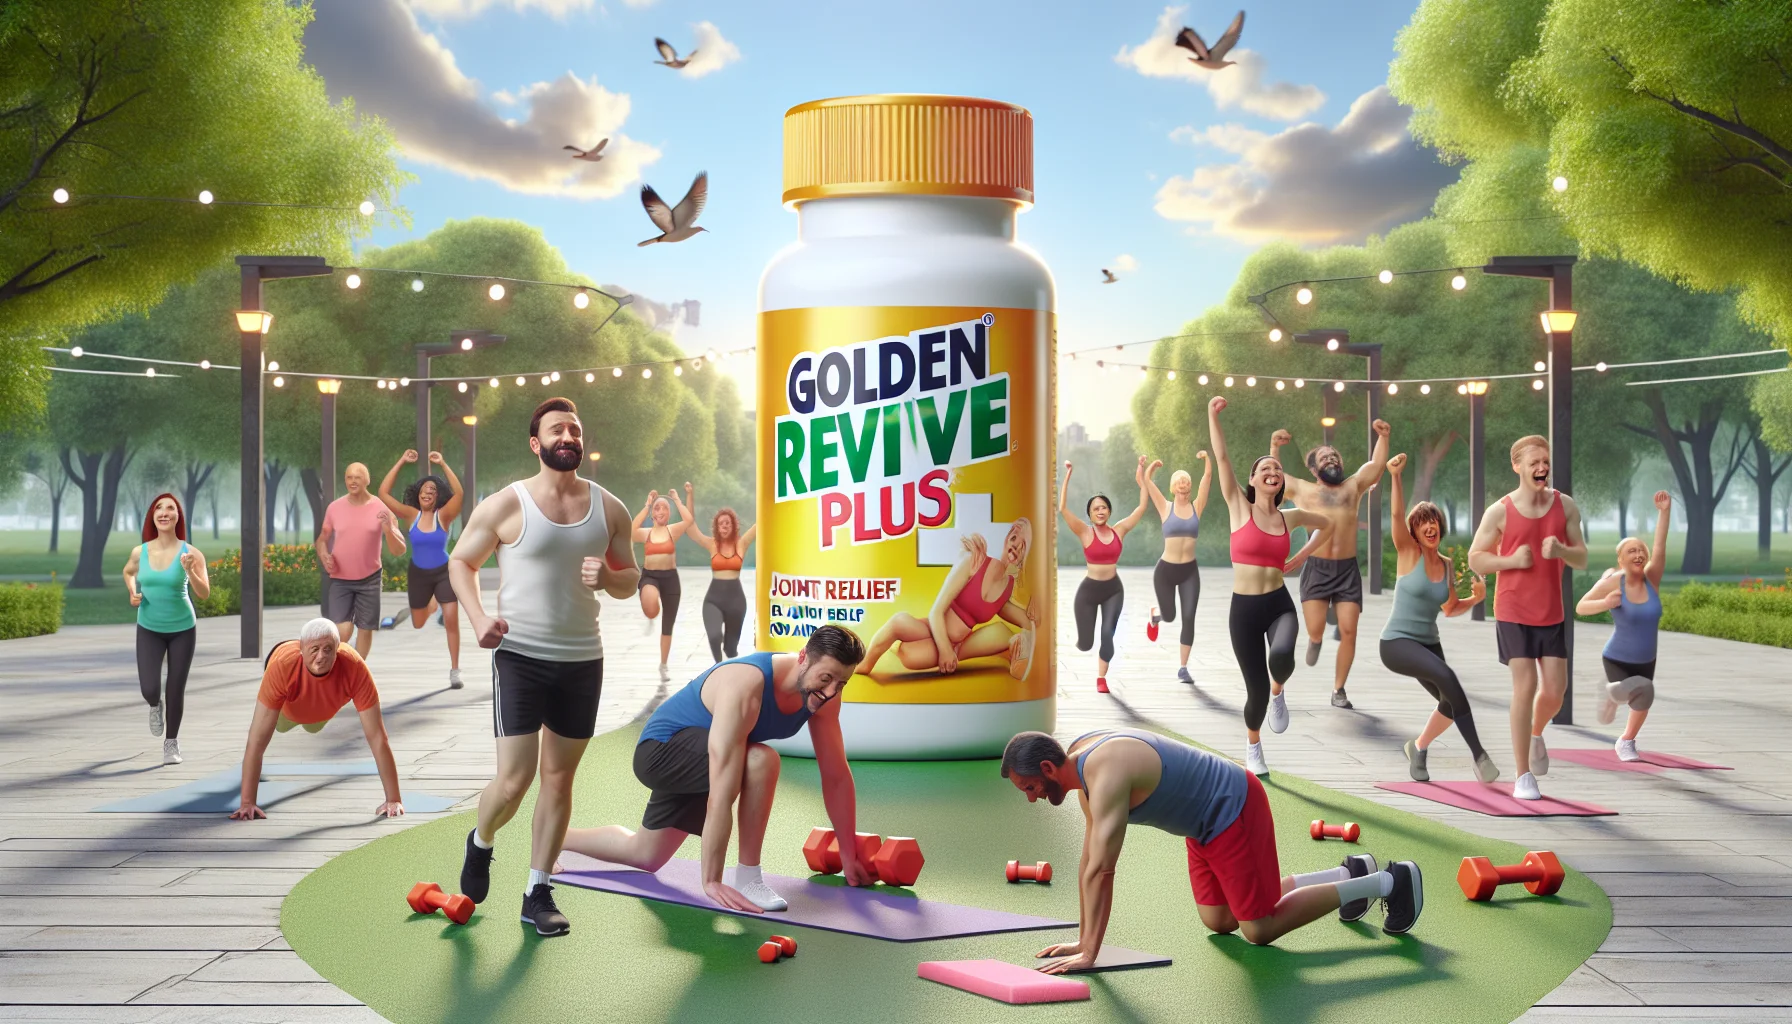 Create a humorous, realistic picture showcasing a product called 'Golden Revive Plus', which offers joint relief for an active lifestyle. The scene is set in a vibrant park where a group of lively individuals from various descents and genders are engaging in a range of exercises - from yoga to jogging to weight lifting. In the foreground, there is a giant bottle of 'Golden Revive Plus' cheerfully participating by doing push-ups, signaling that exercise and joint relief go hand in hand. Every person's energetic demeanor subtly encourages the viewers to lead an active lifestyle.